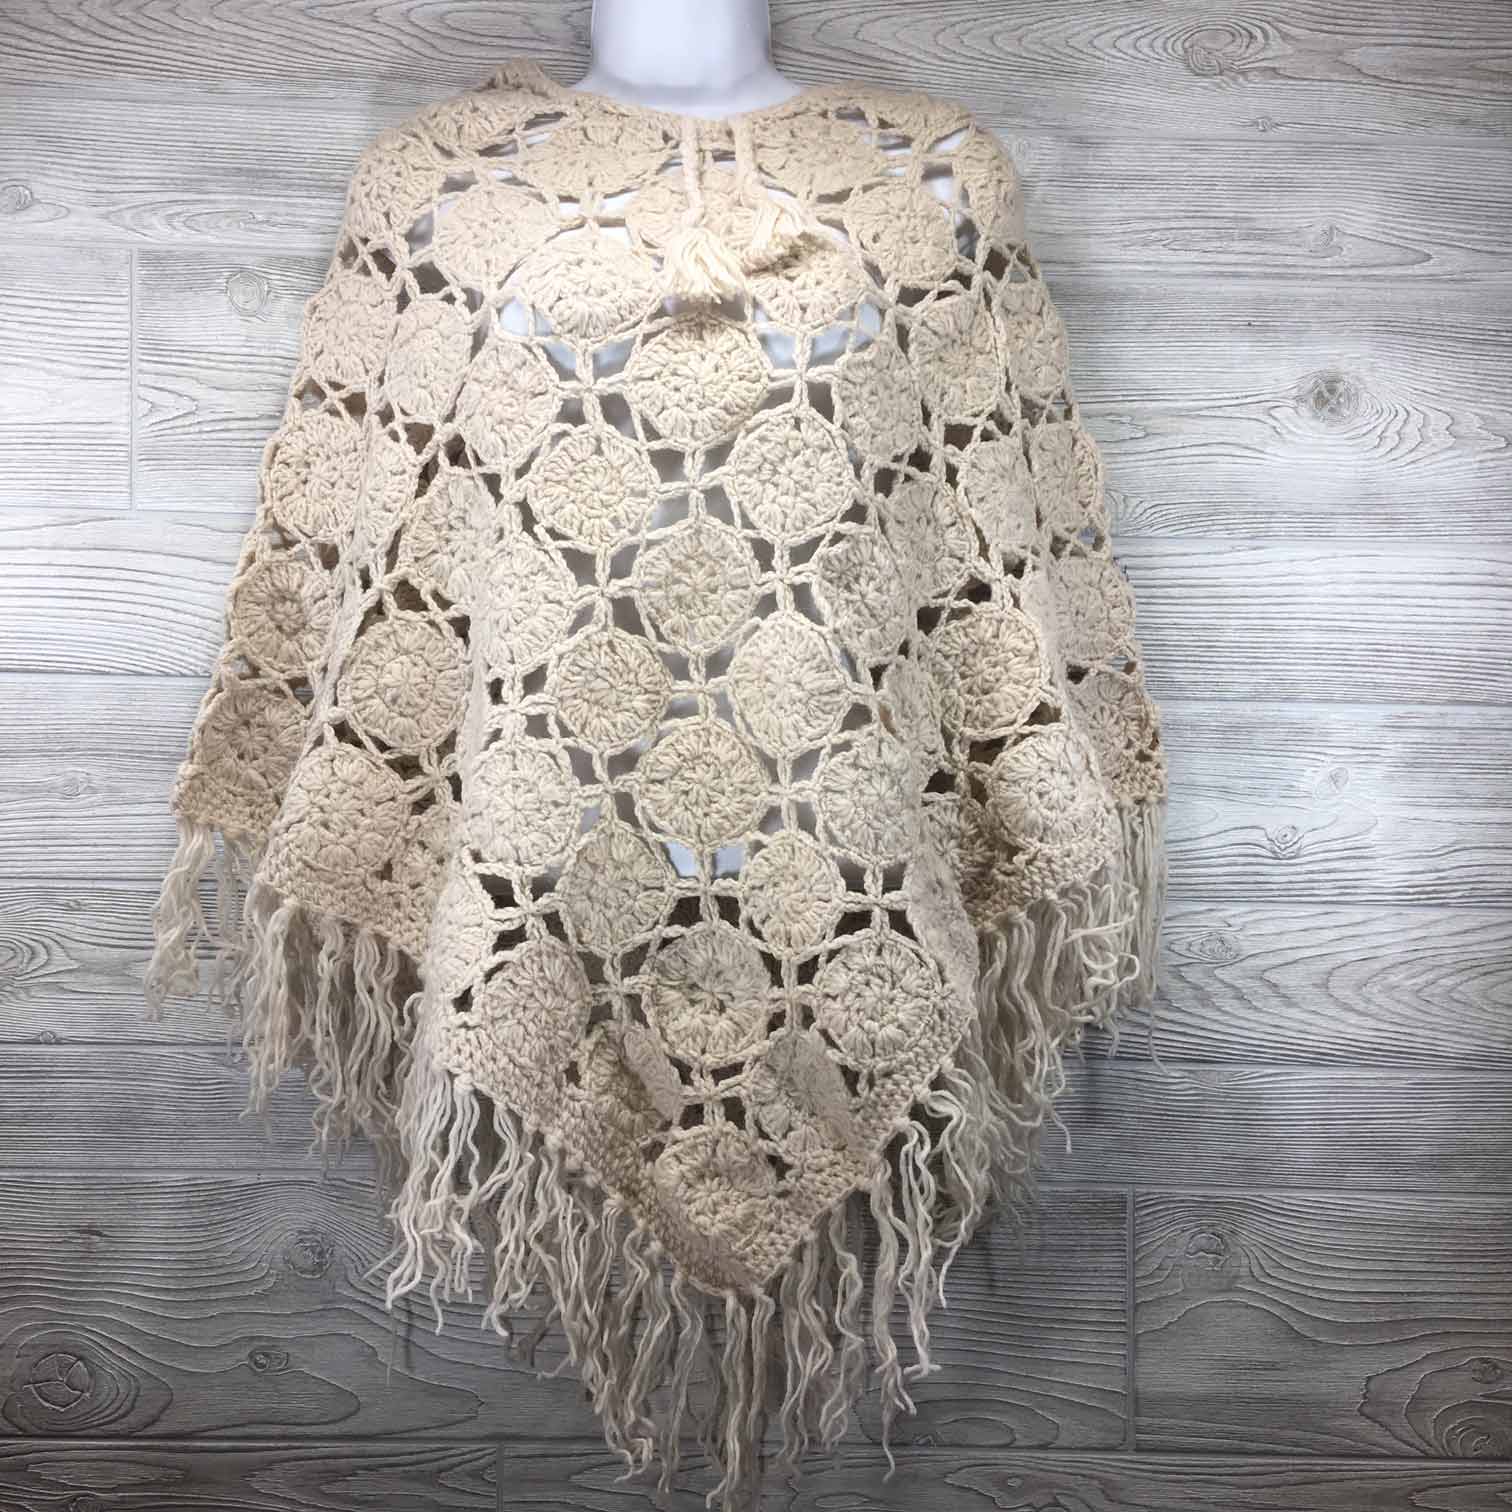 Women's Crochet Granny Square Boho Wool Poncho with Fringes - One Size Fits Small to Medium - White